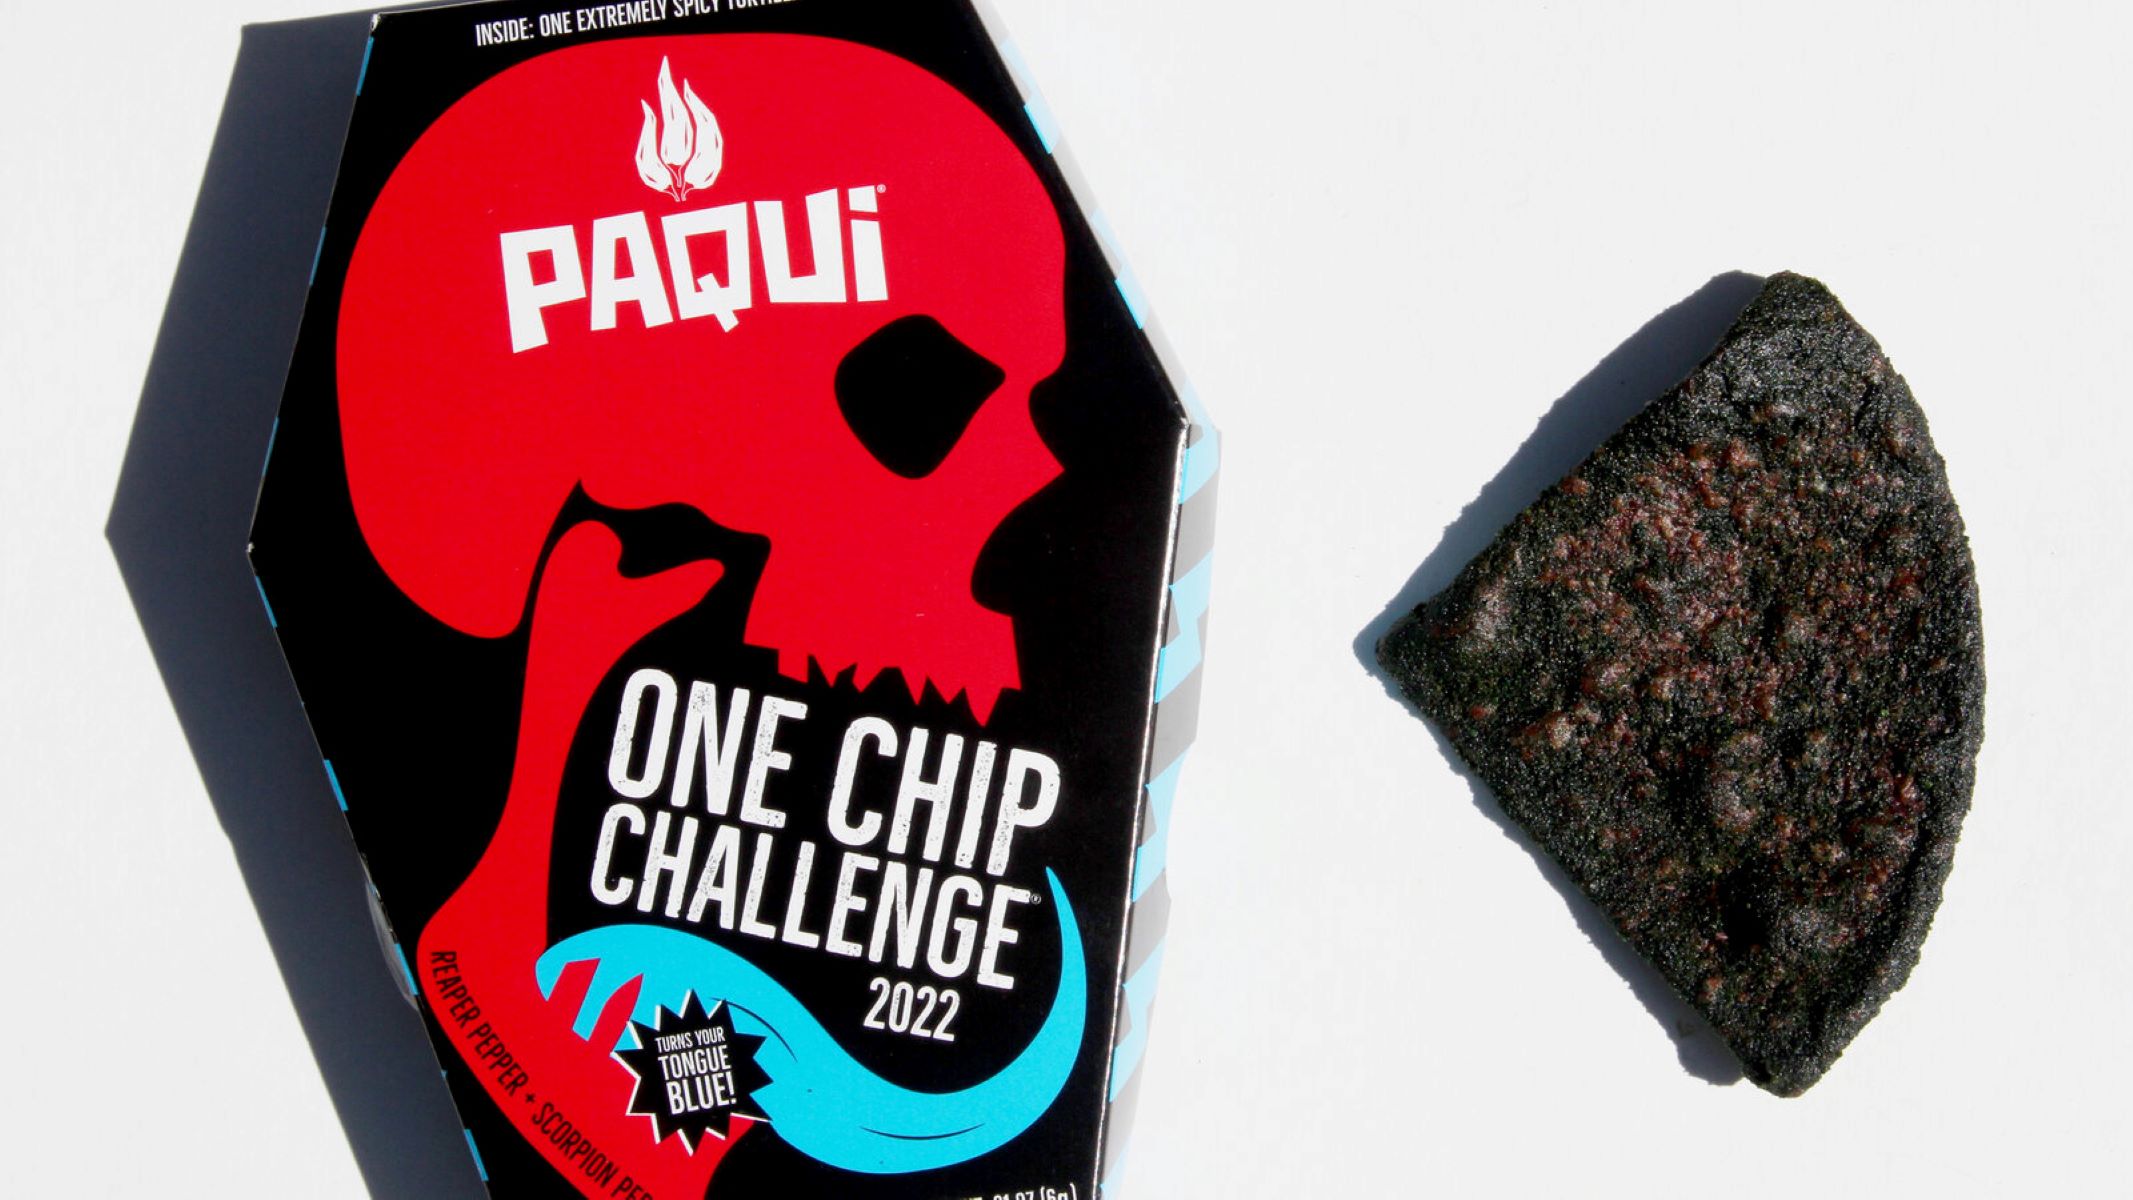 one-chip-challenge-chip-pulled-off-store-shelves-after-teenager-dies-paqui-takes-action